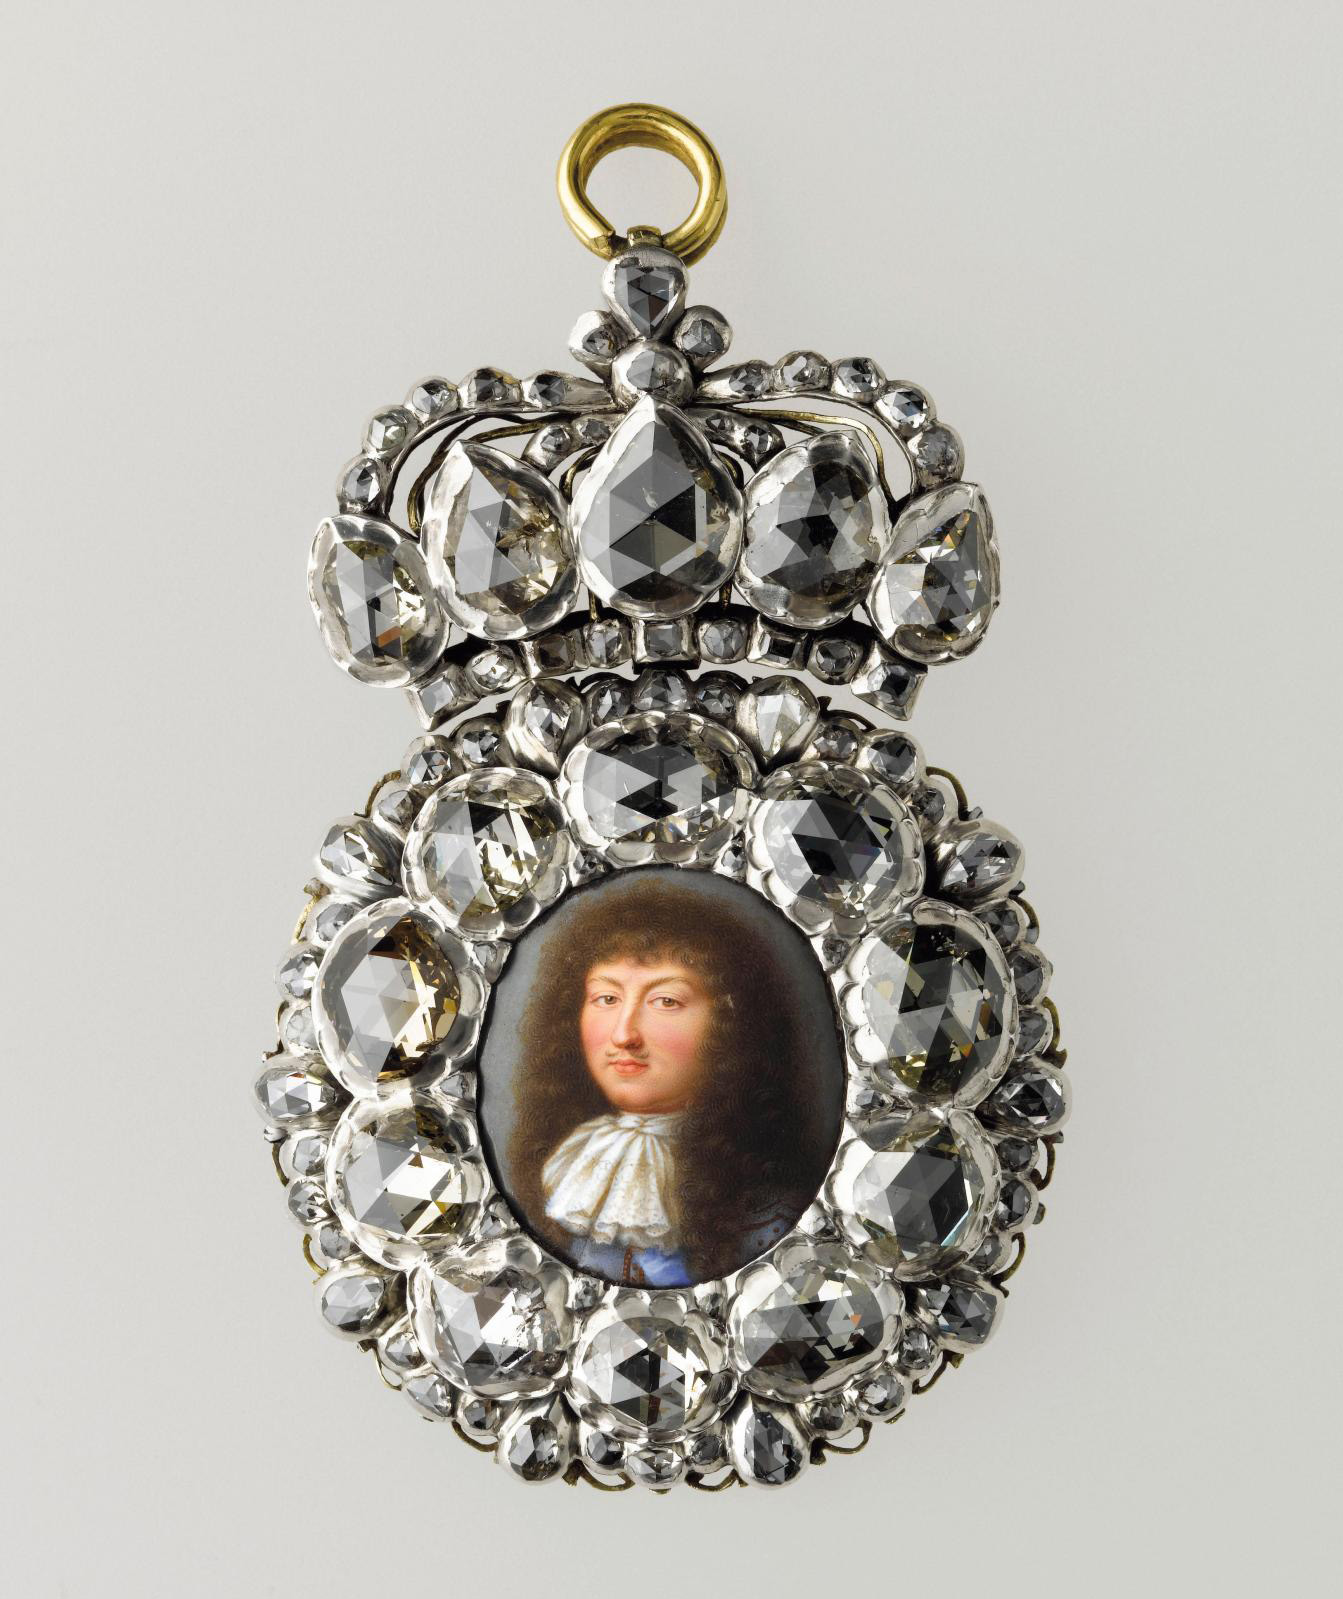 Miniature Enamel Painting in the 17th Century